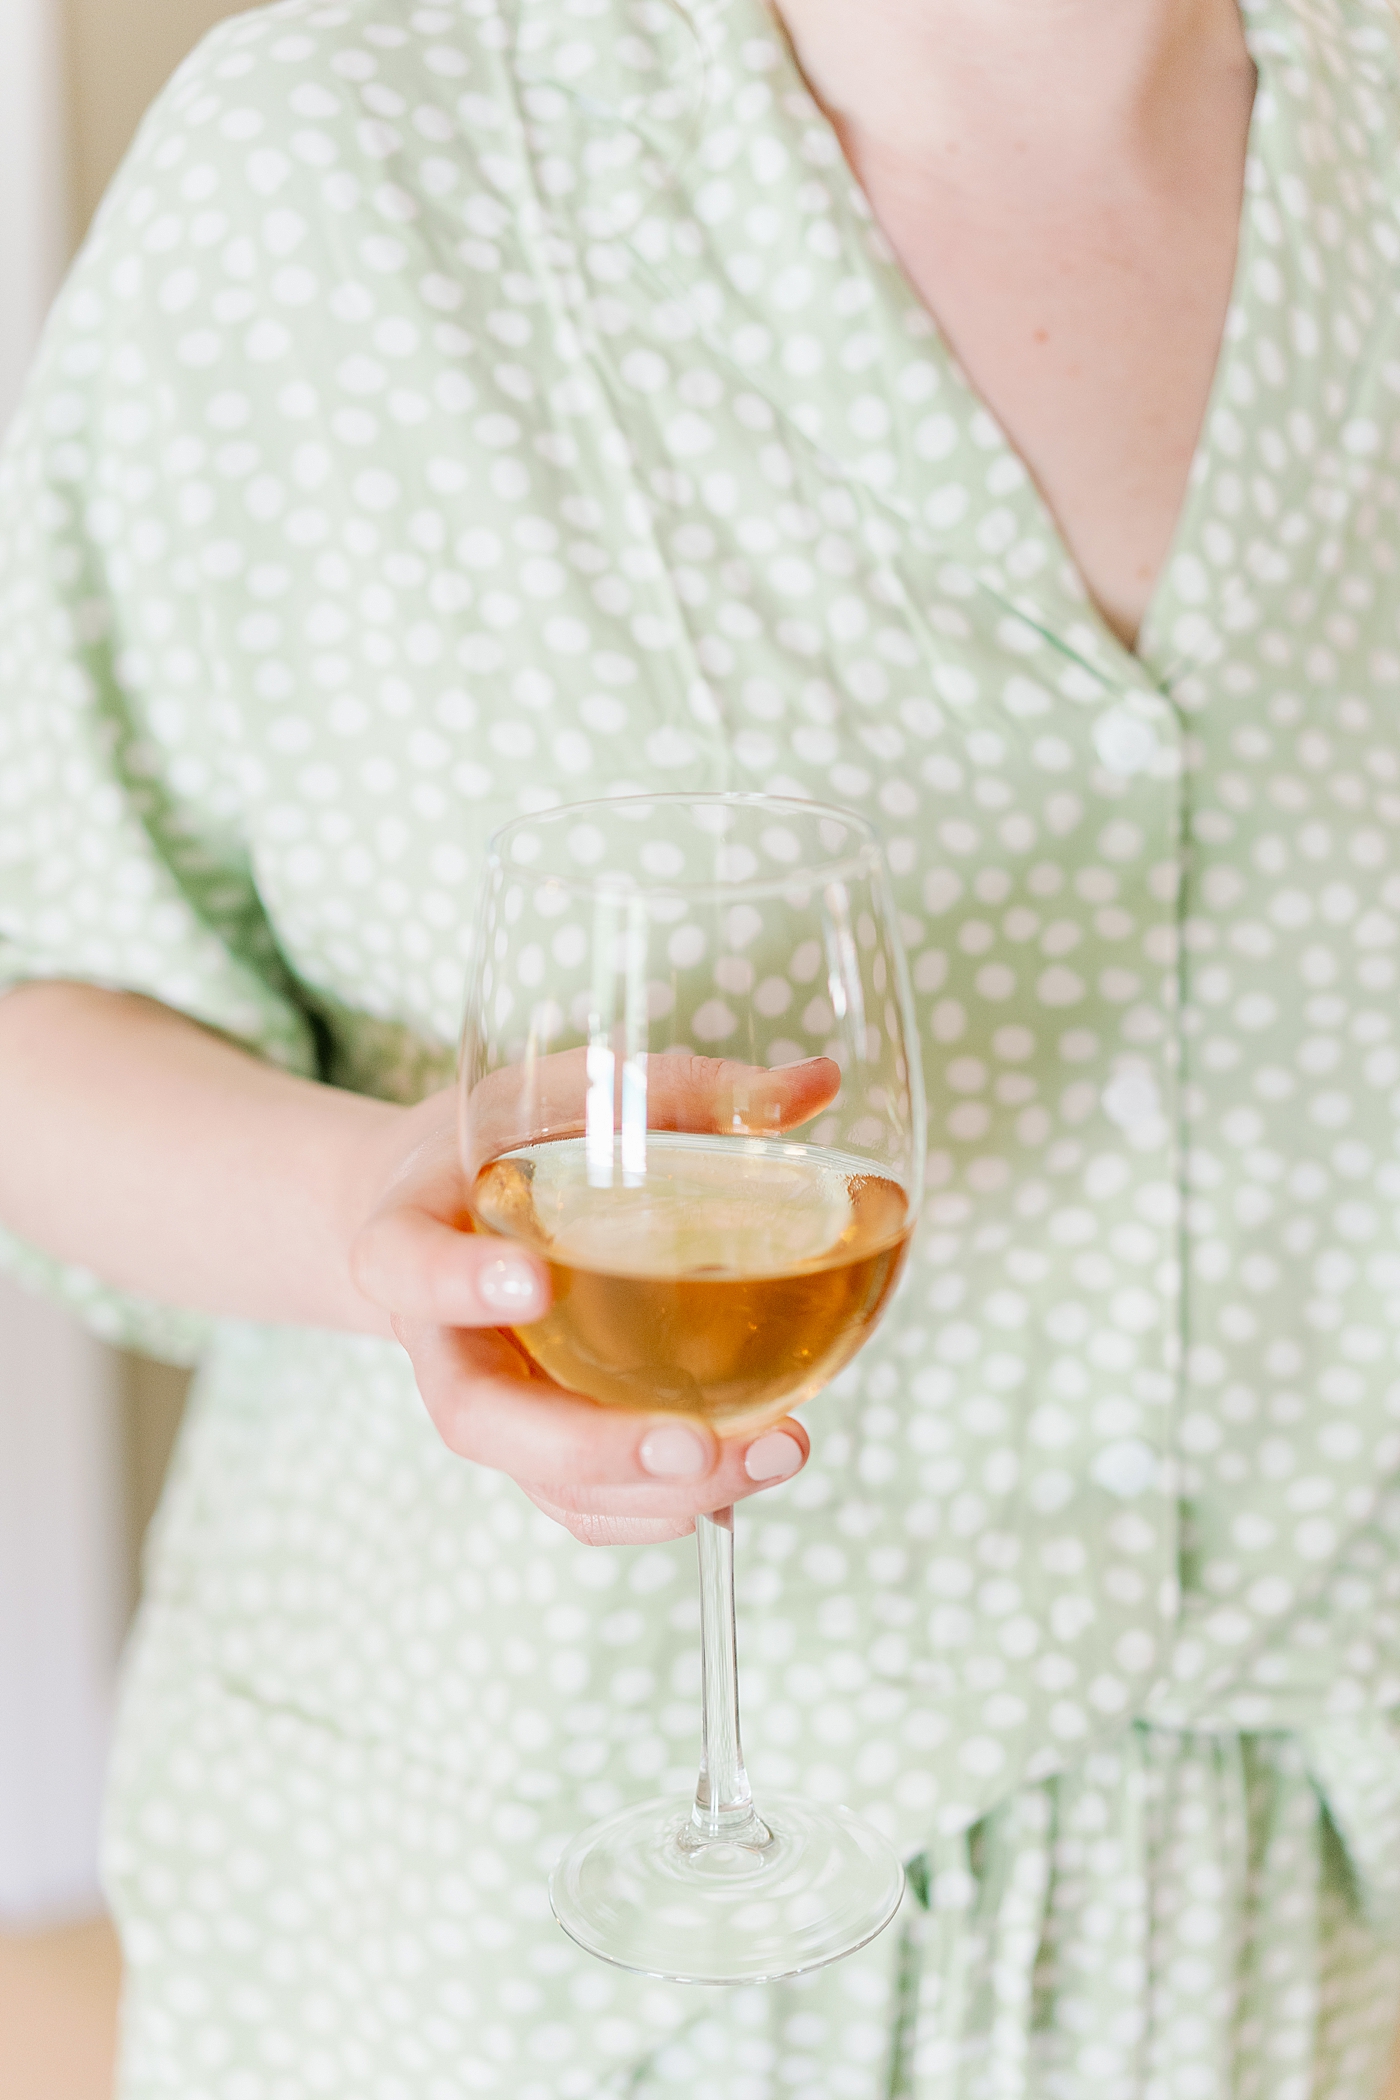 Bridesmaid in green pajamas holding a glass of rose | Photo by Annie Laura Photography